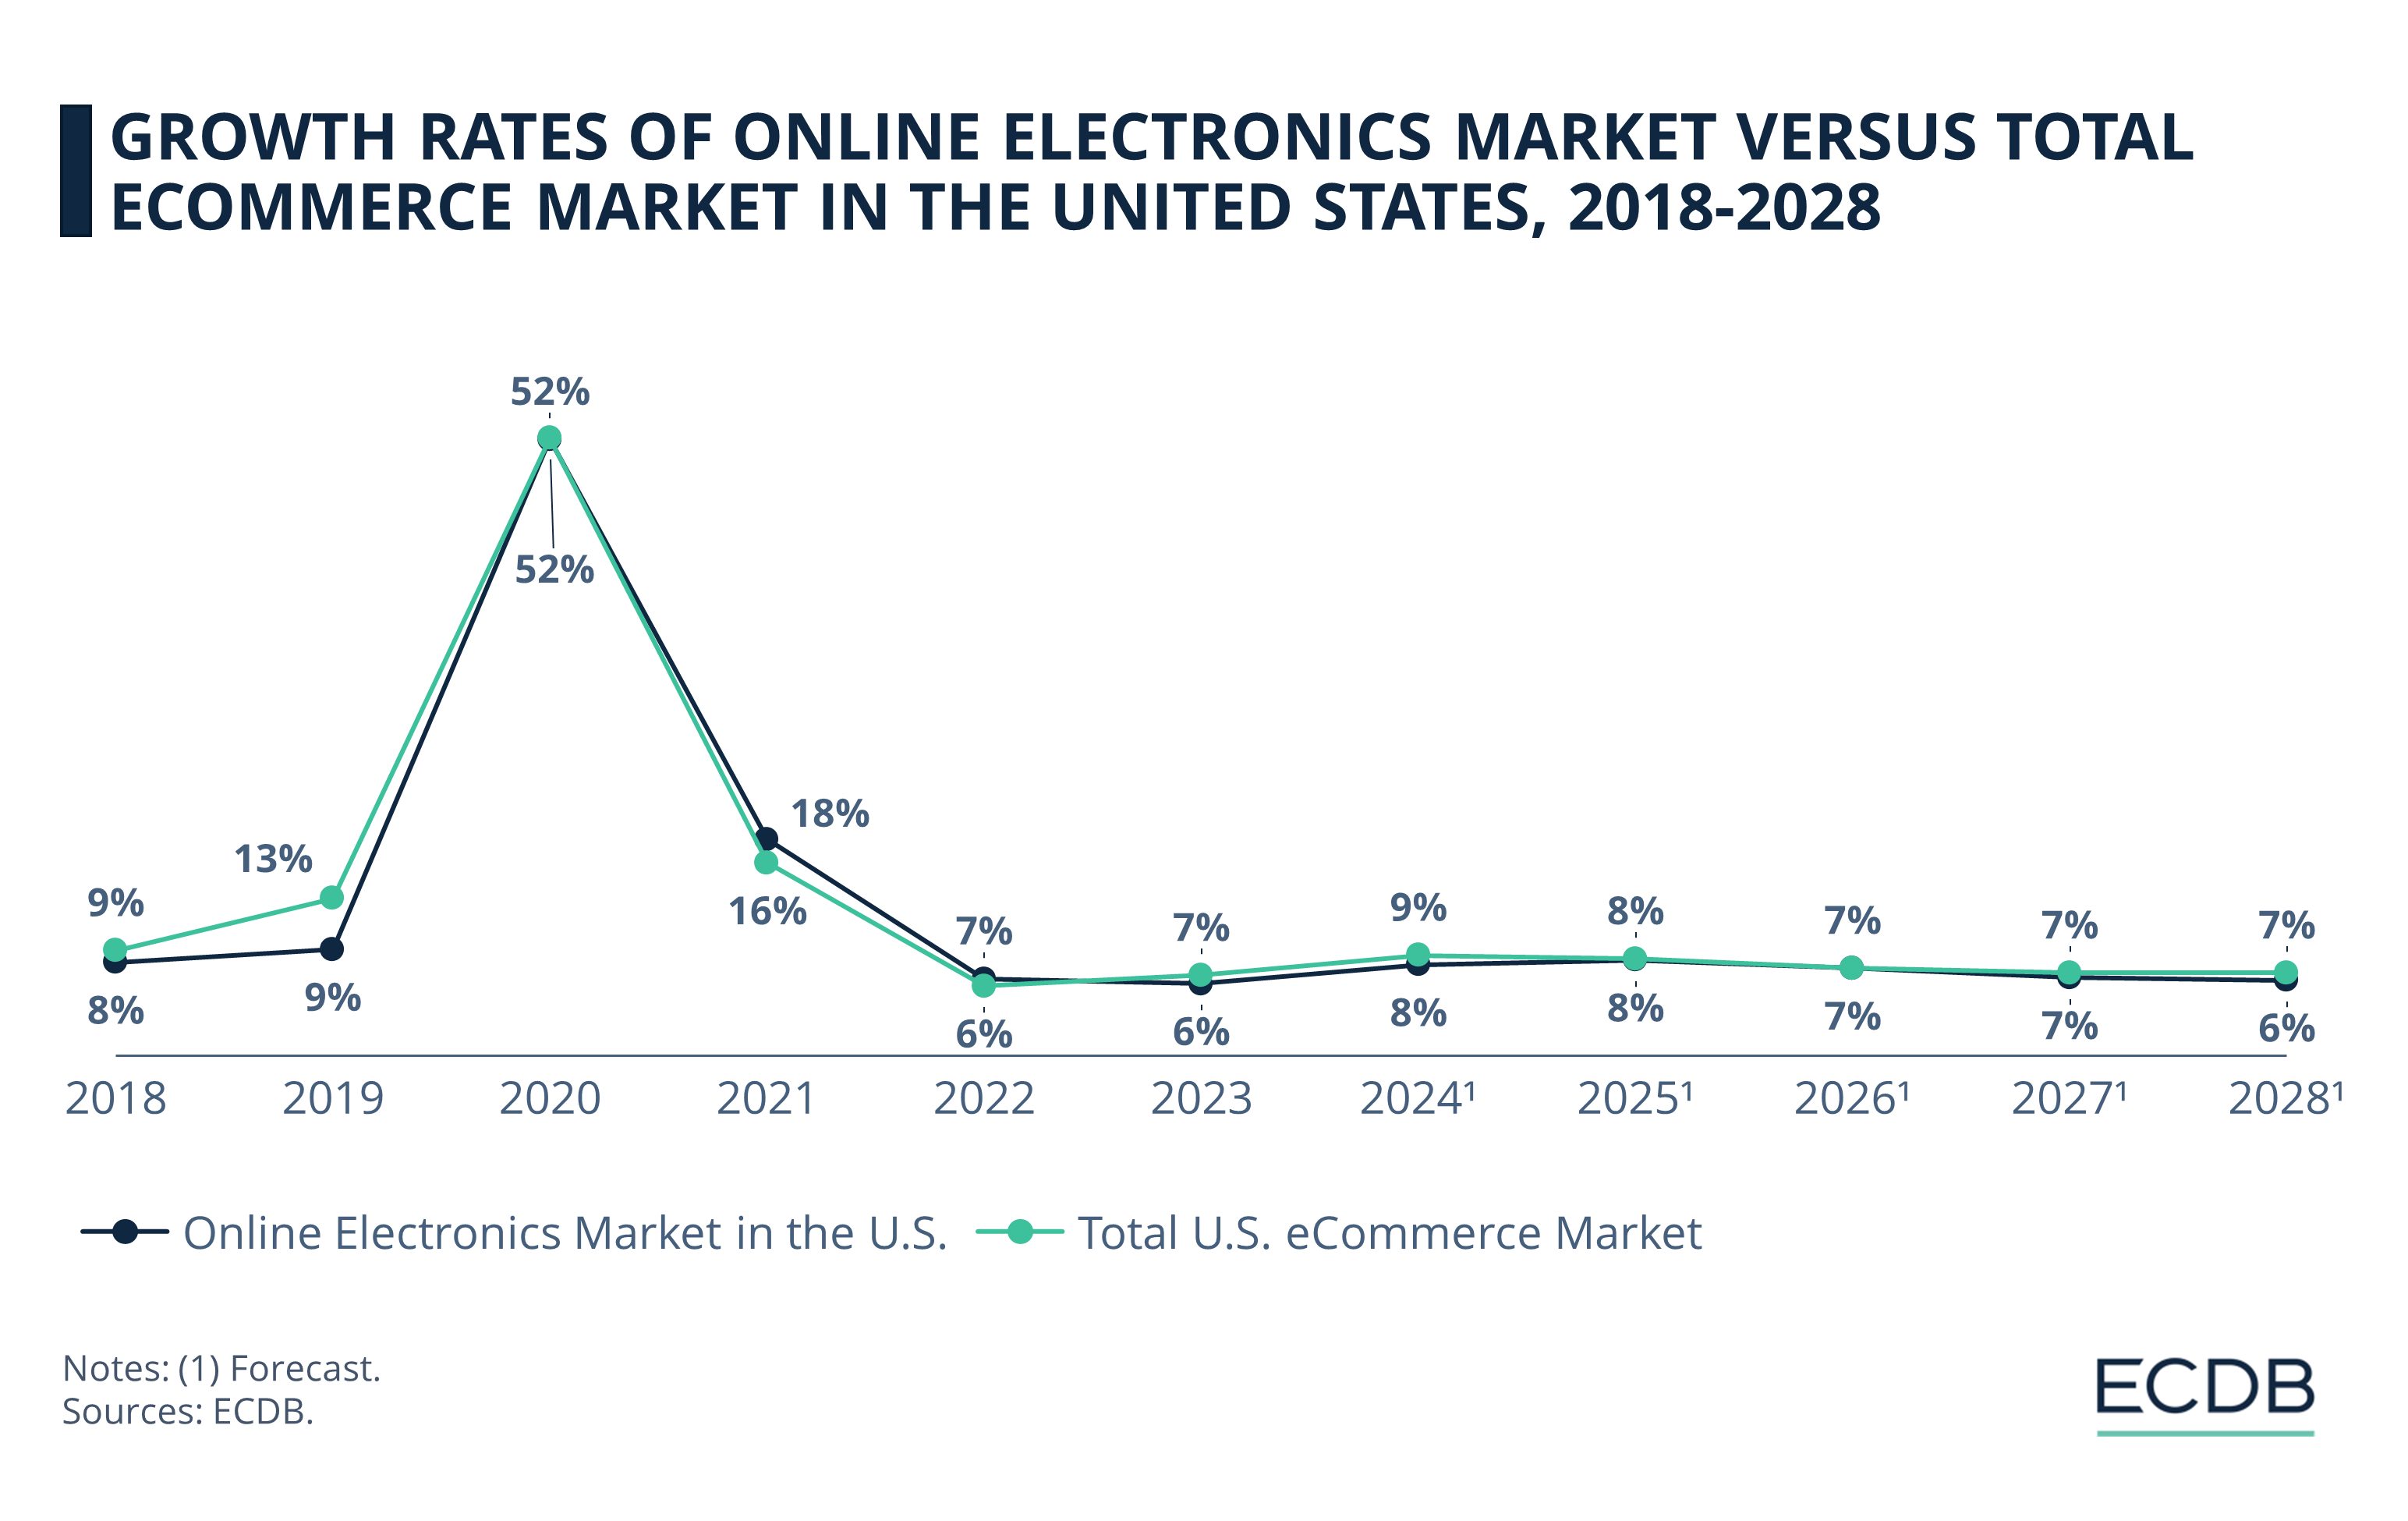 Growth Rates of Online Electronics Market Versus Total eCommerce Market in the United States, 2018-2028